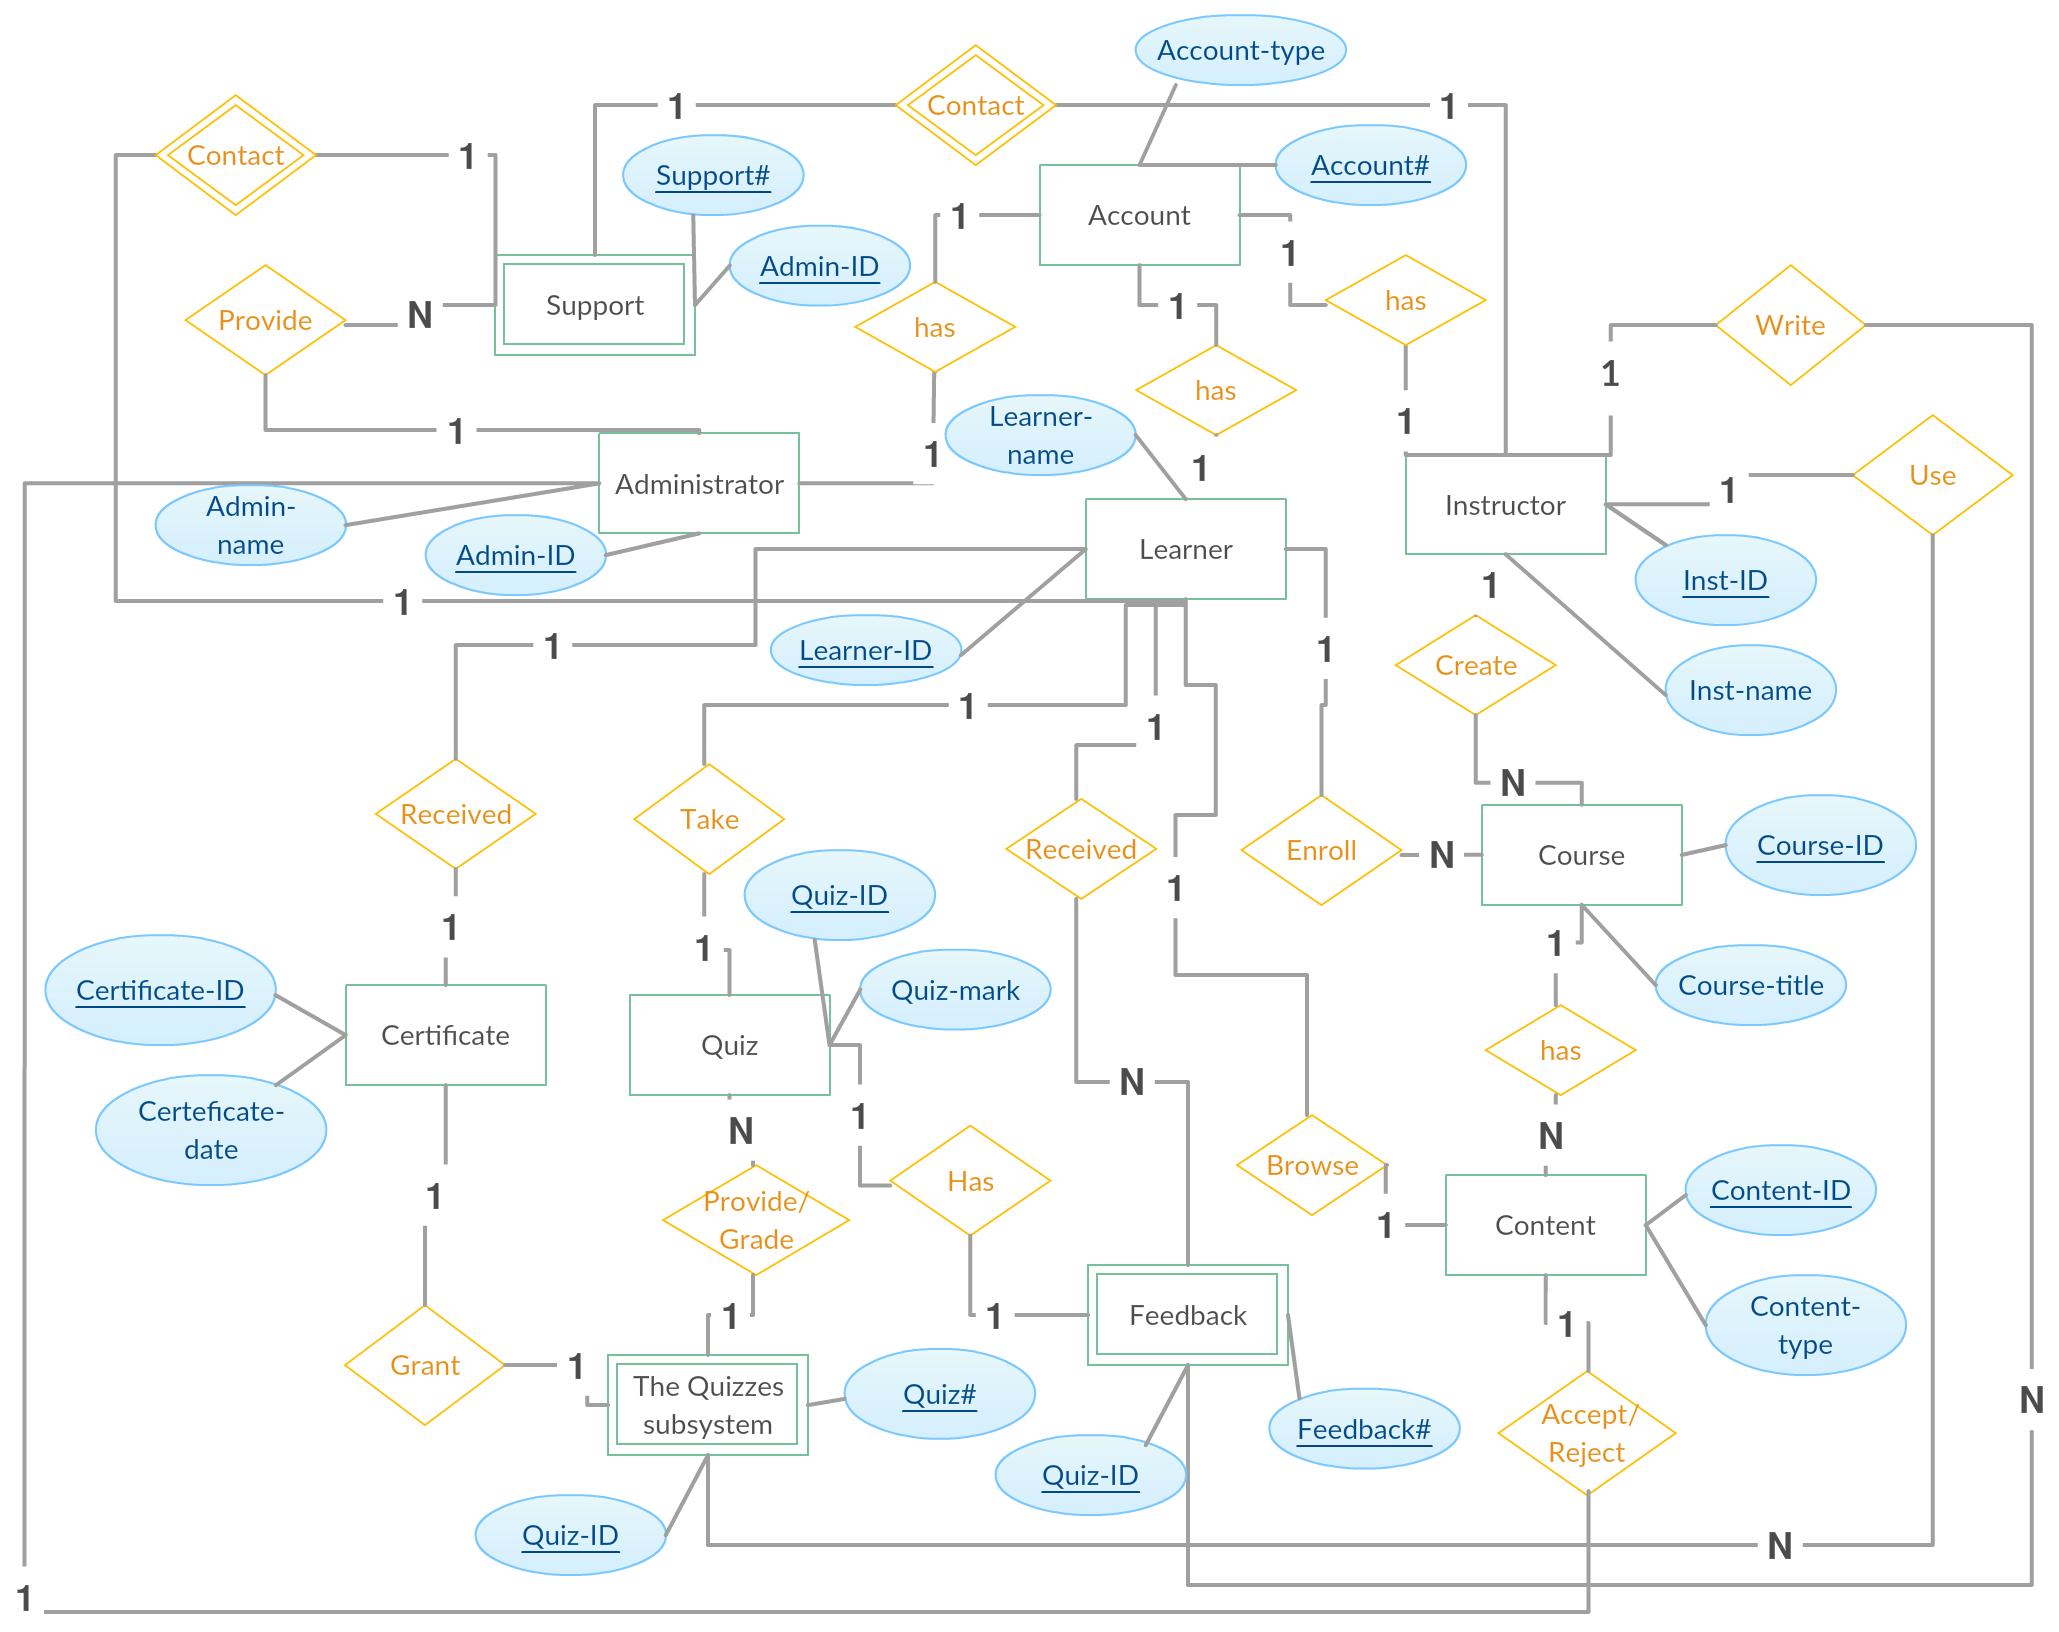 Entity Relationship Diagram (Er Diagram) Of E-Learning within Entity Relationship Schema